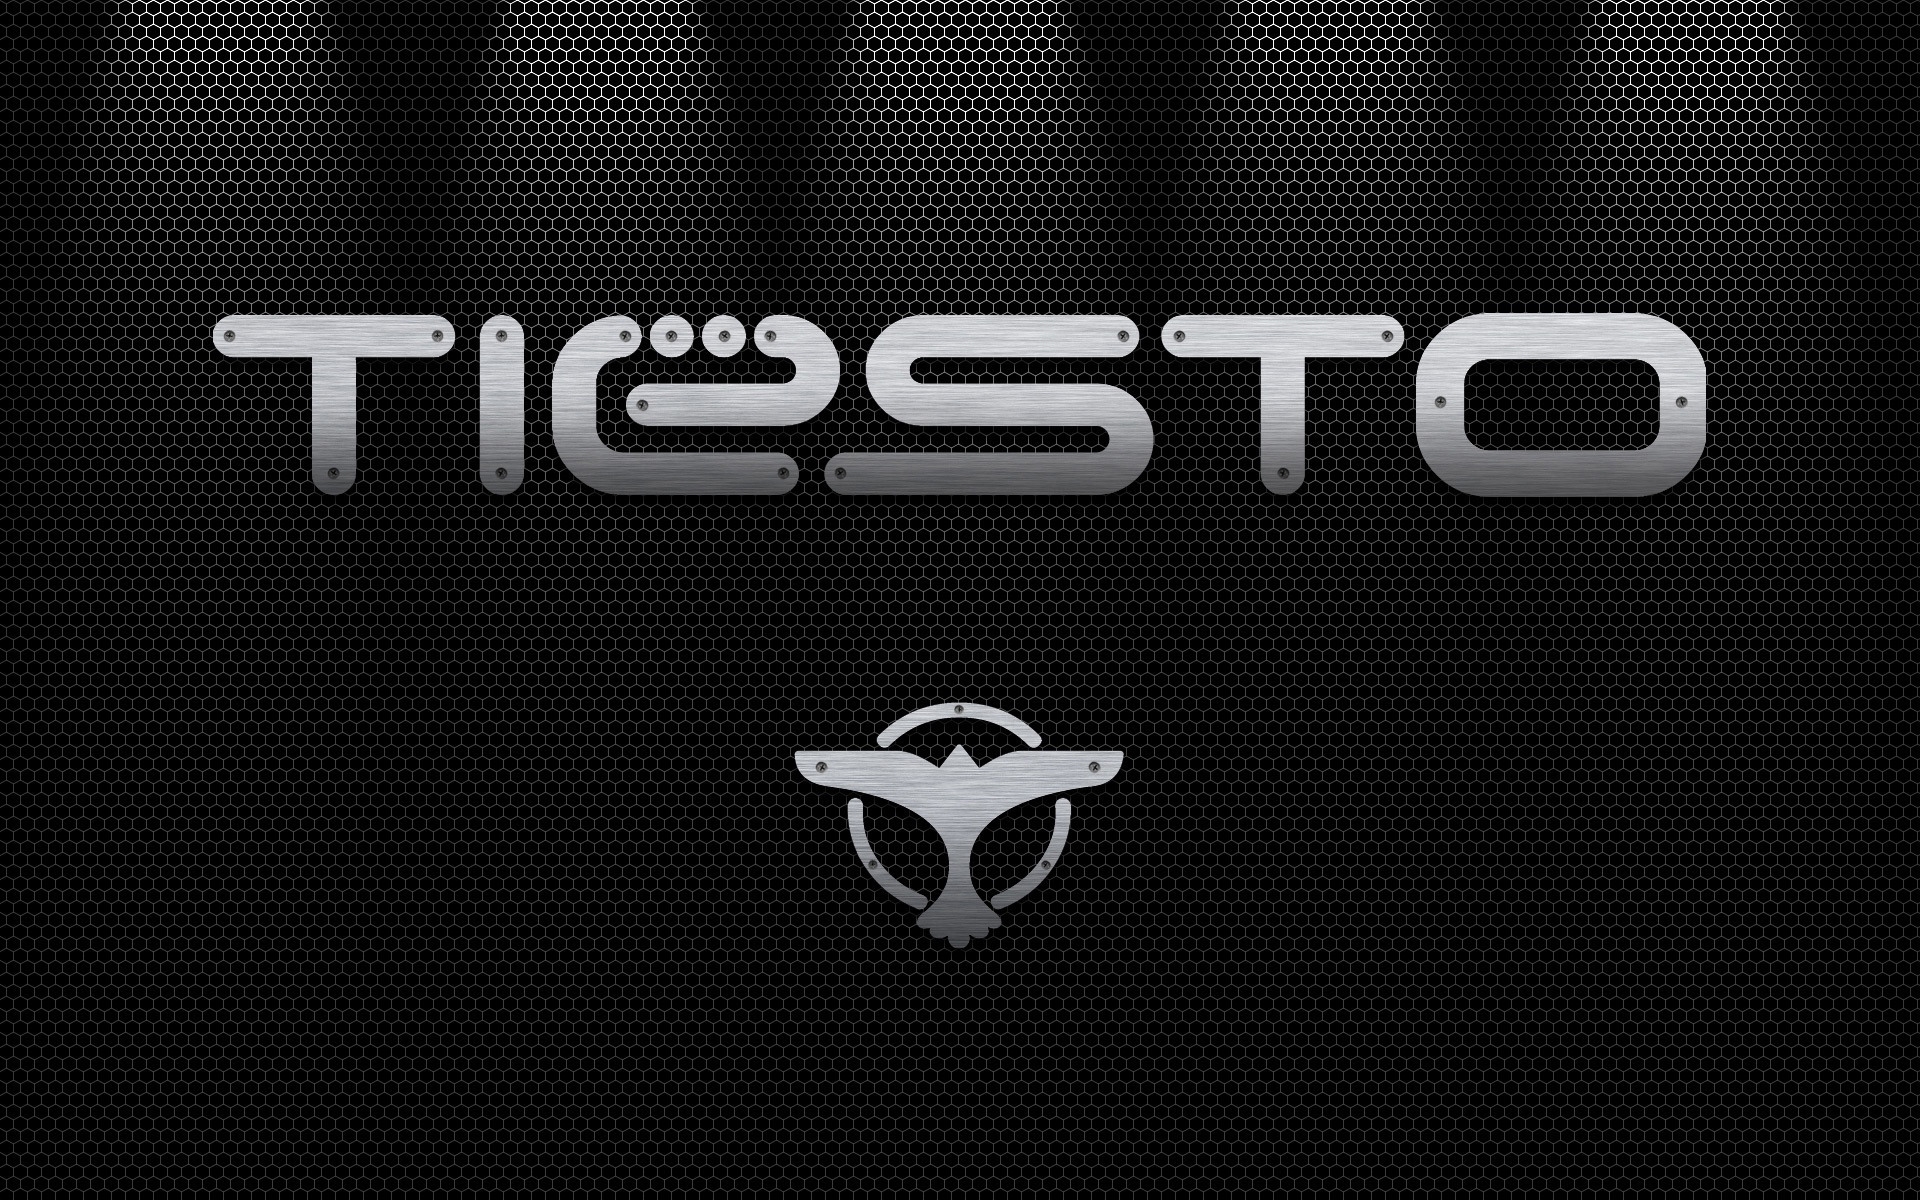 DJ Tiesto logo wallpapers and images   wallpapers pictures photos